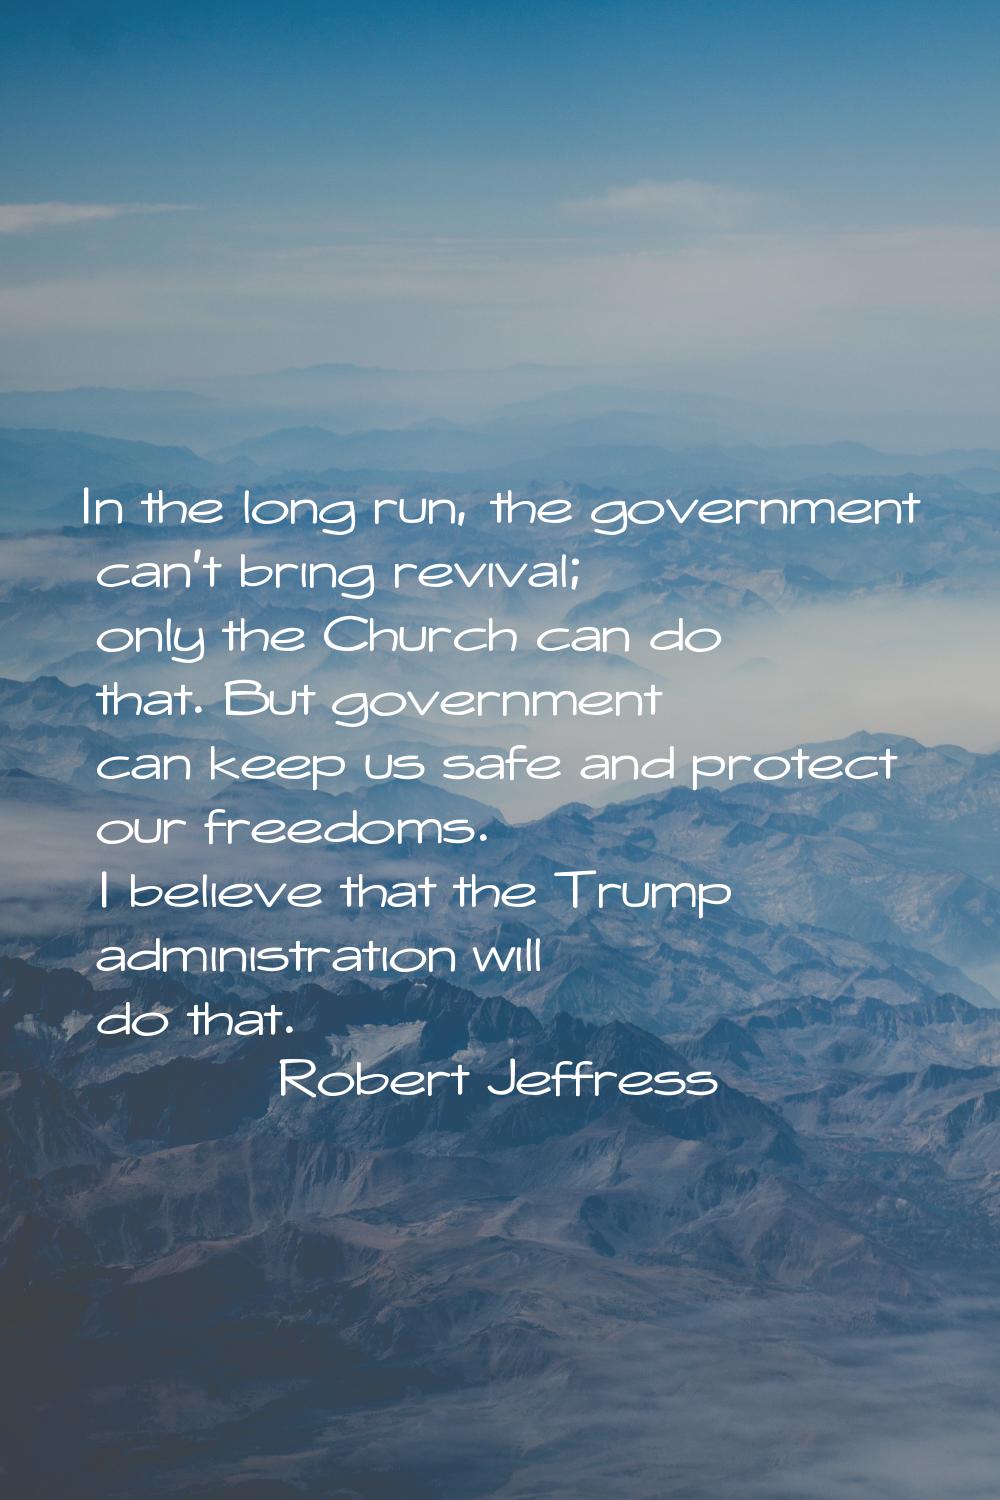 In the long run, the government can't bring revival; only the Church can do that. But government ca